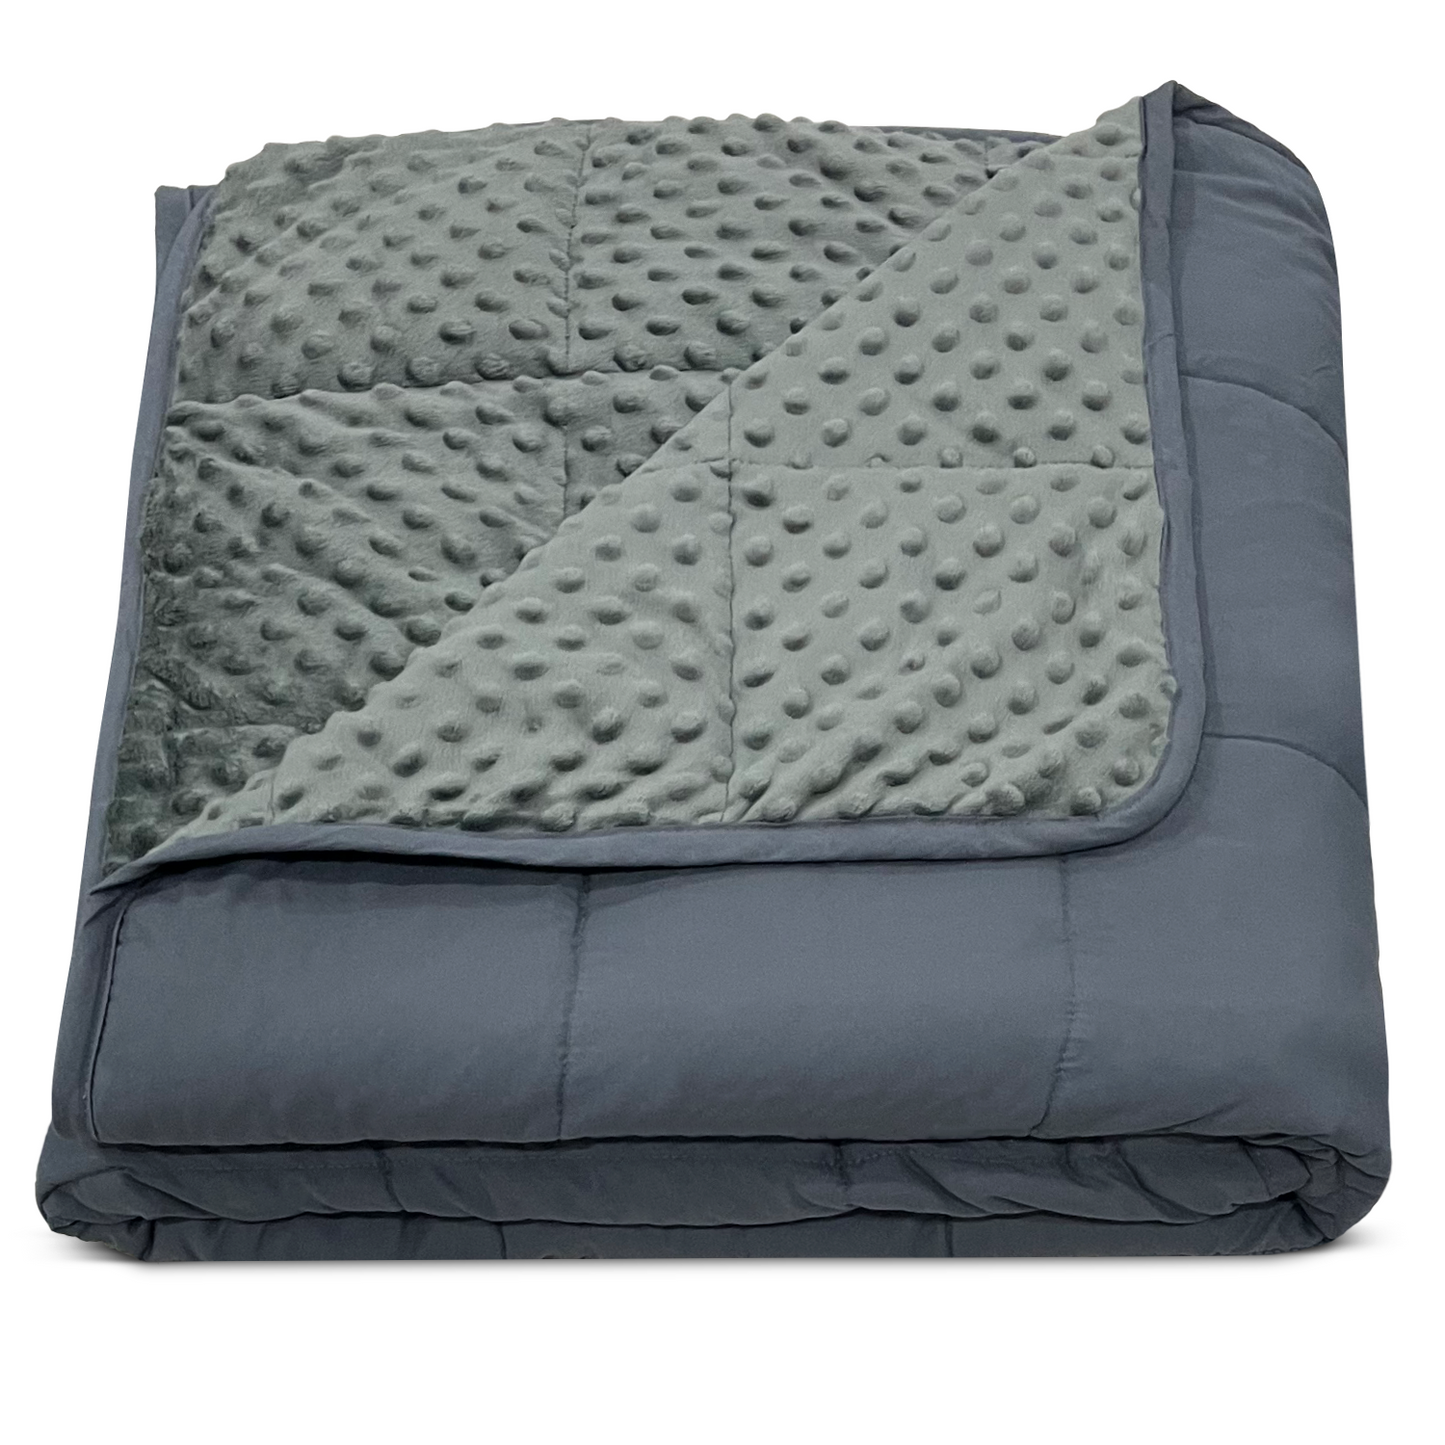 Weighted blanket 20 pound Grey inner/ Grey outer